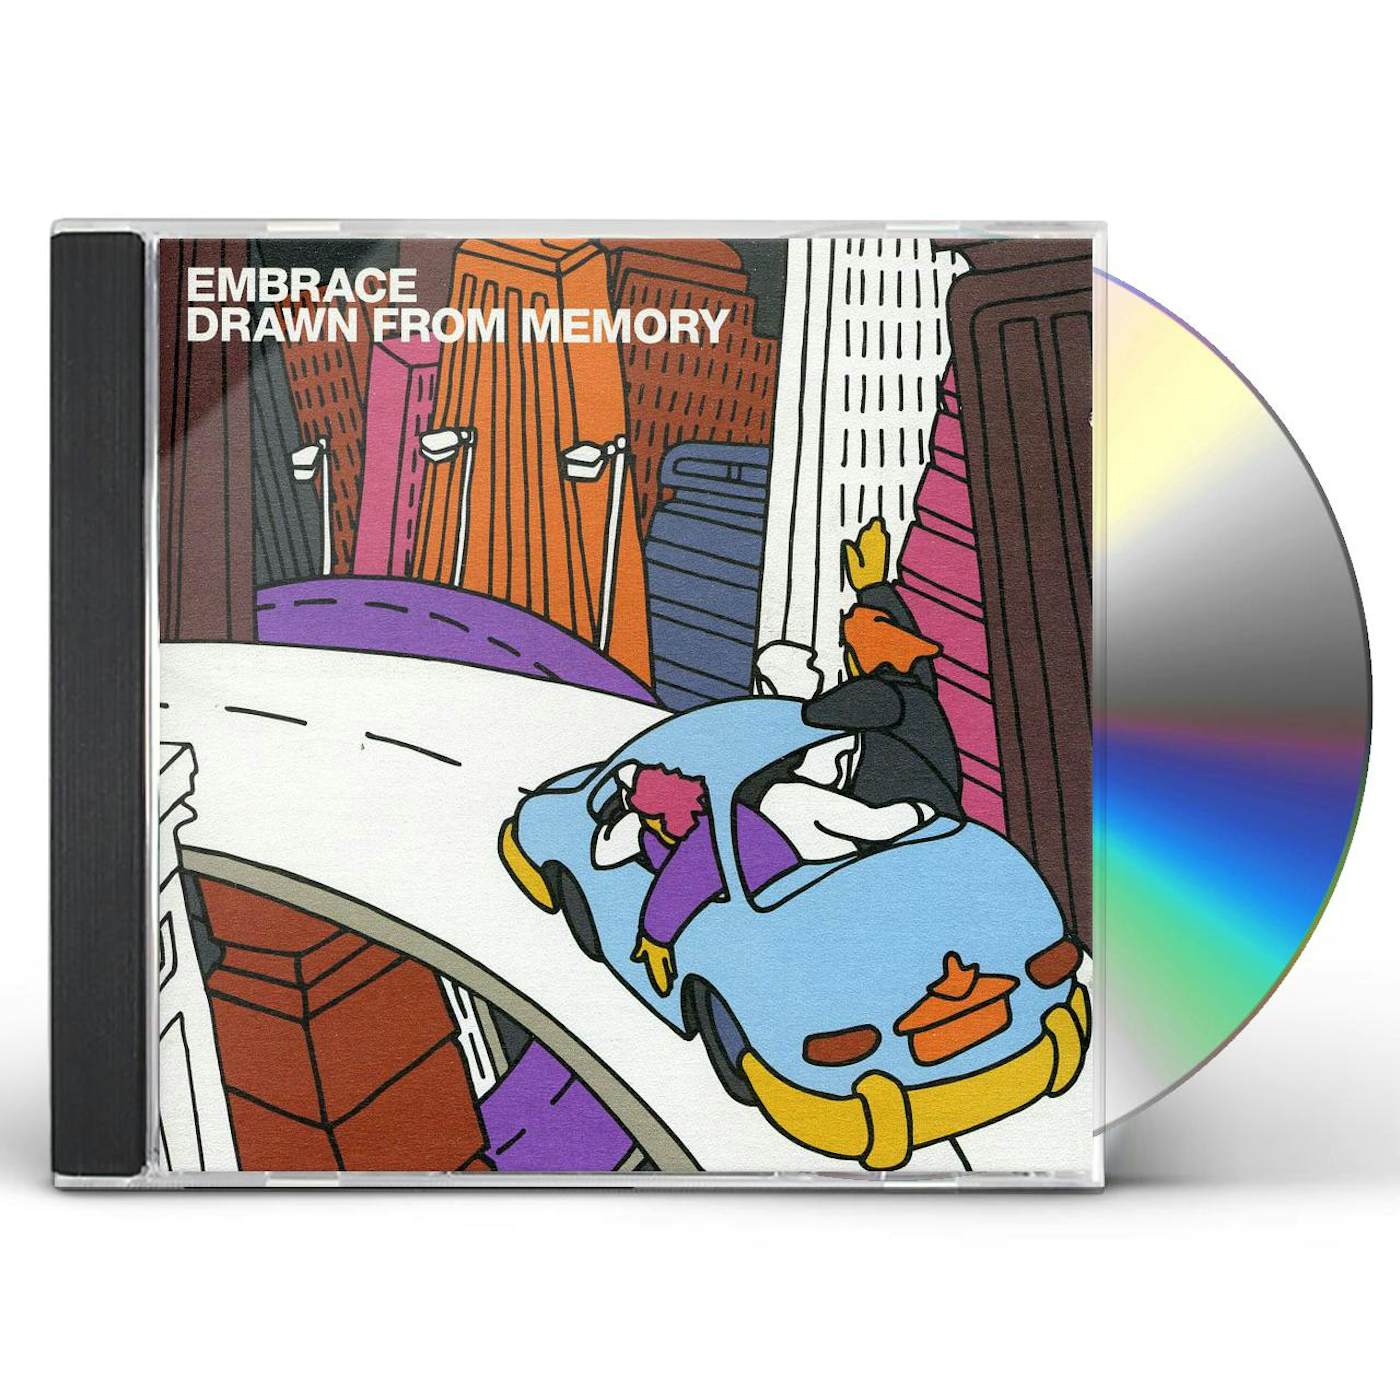 Embrace DRAWN FROM MEMORY CD